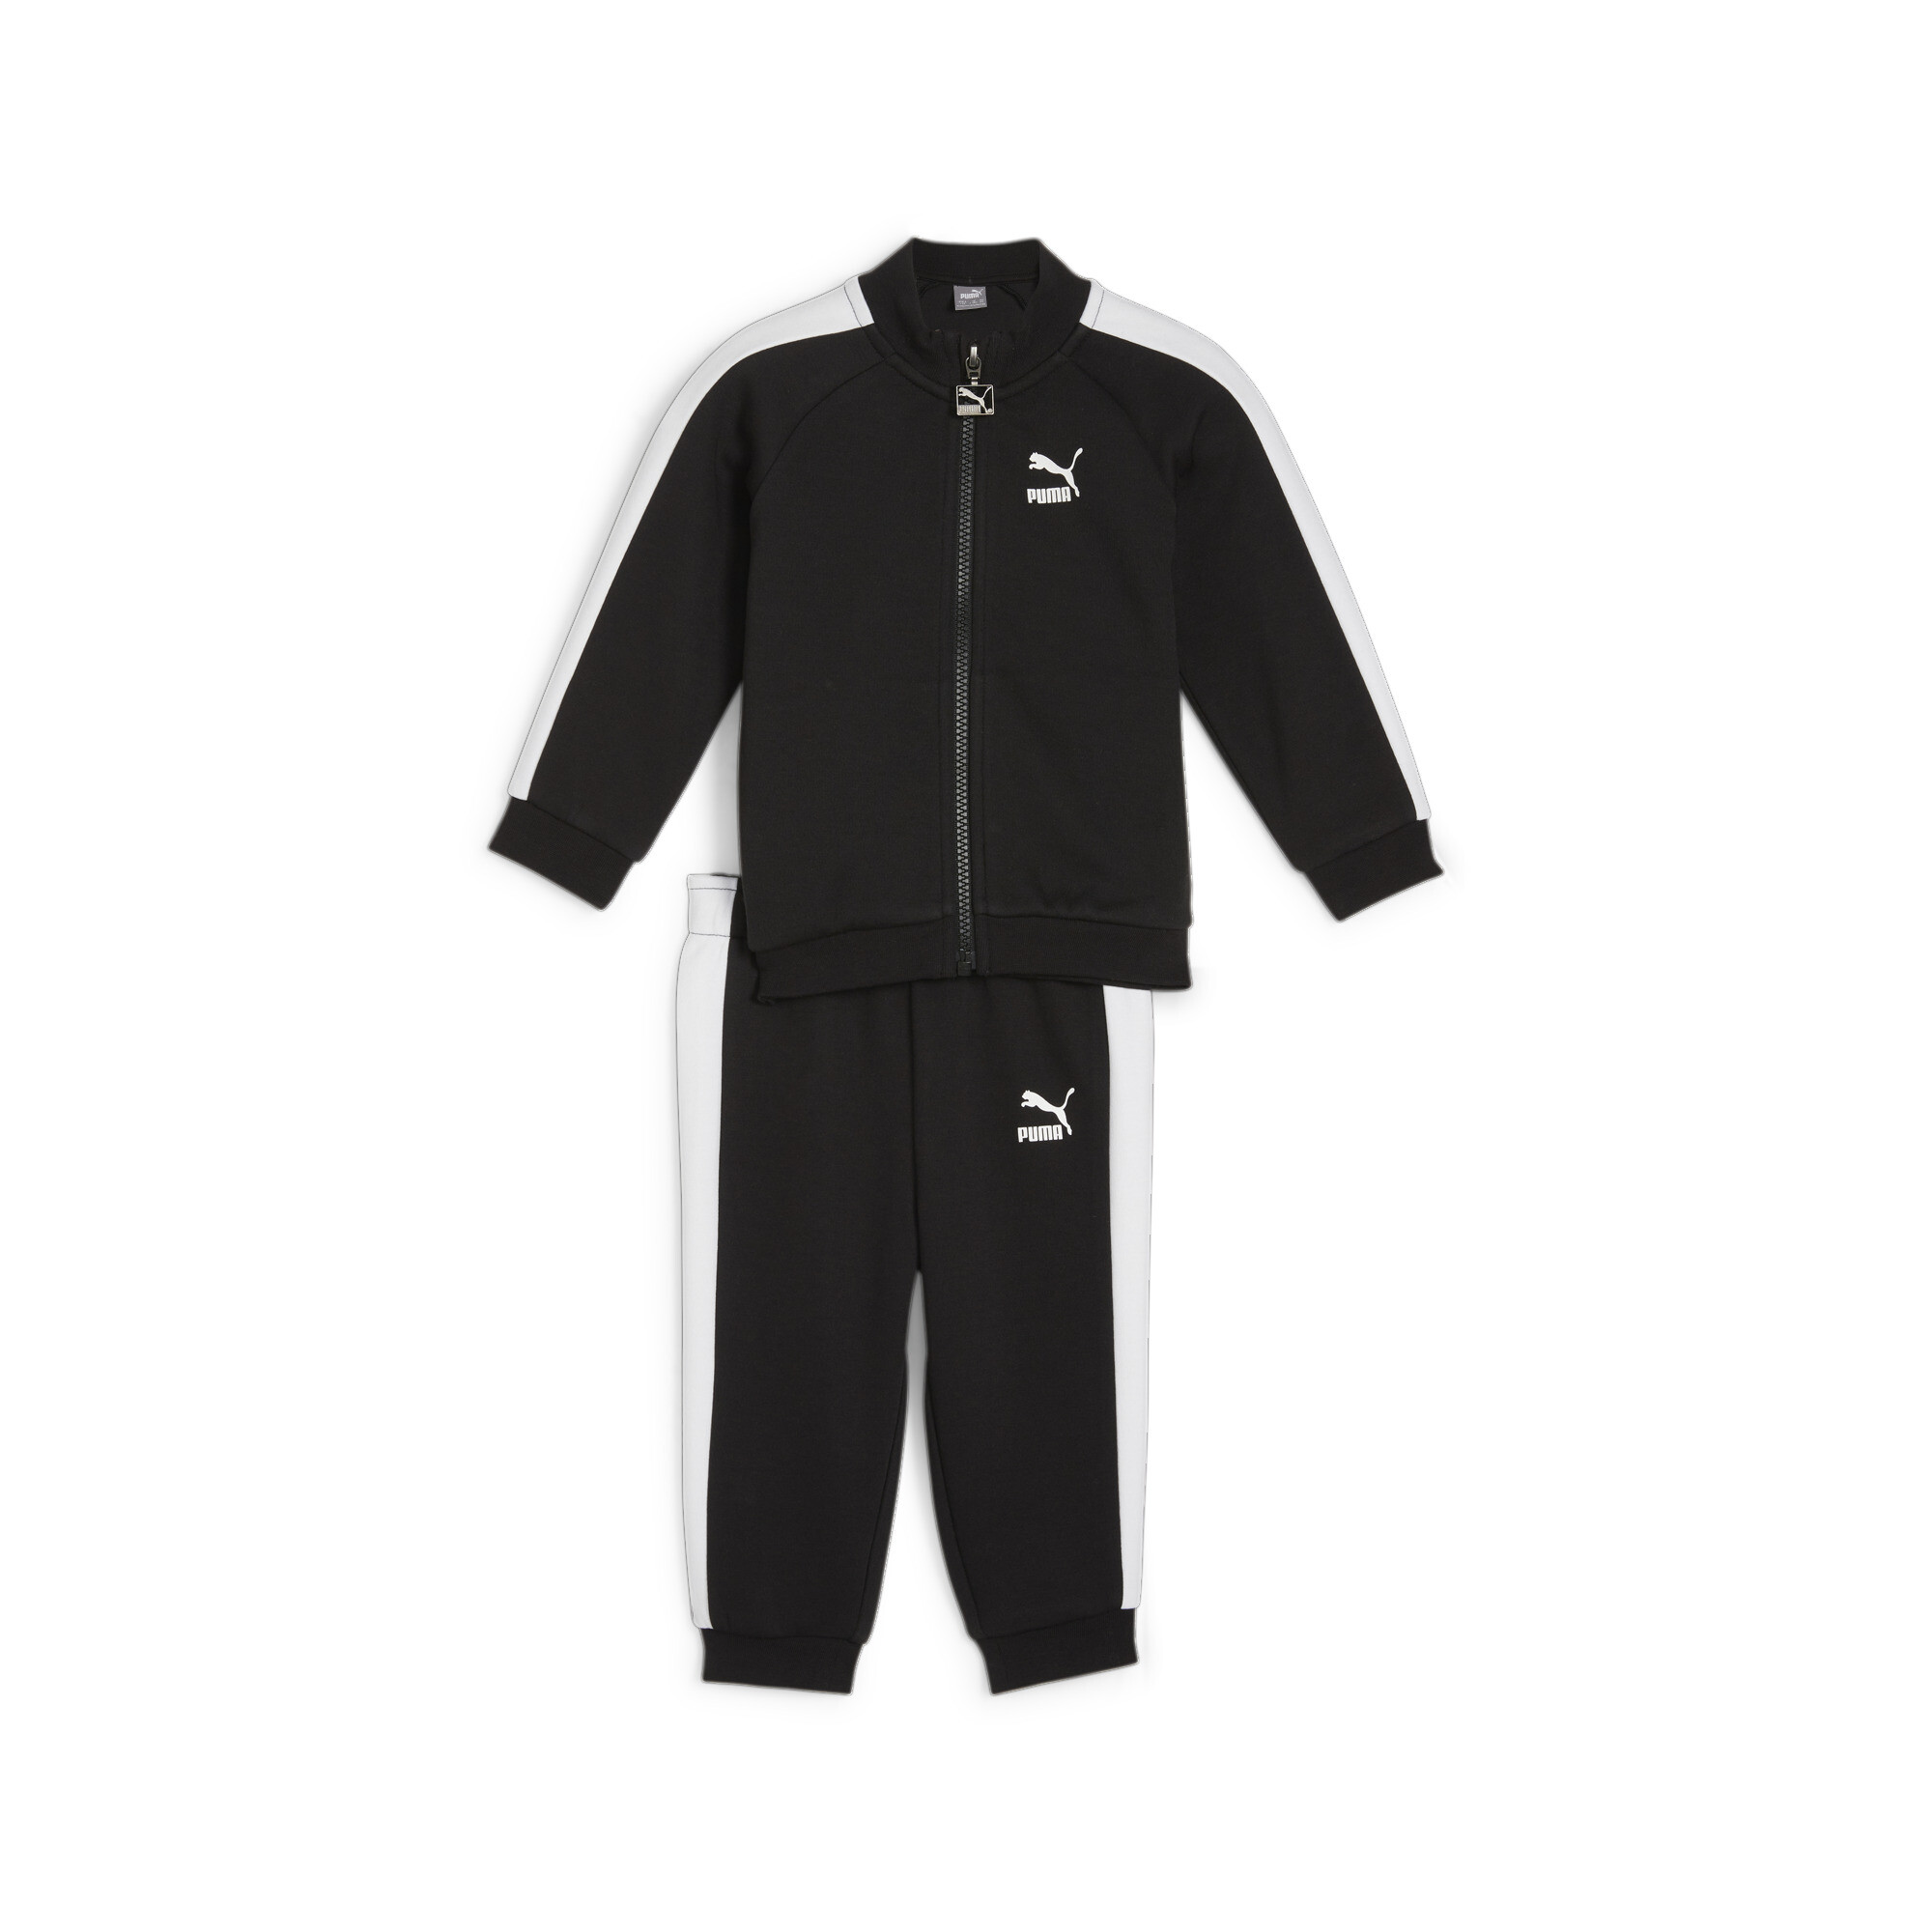 Kids' PUMA MINICATS T7 ICONIC Baby Tracksuit Set In 10 - Black, Size 9-12 Months